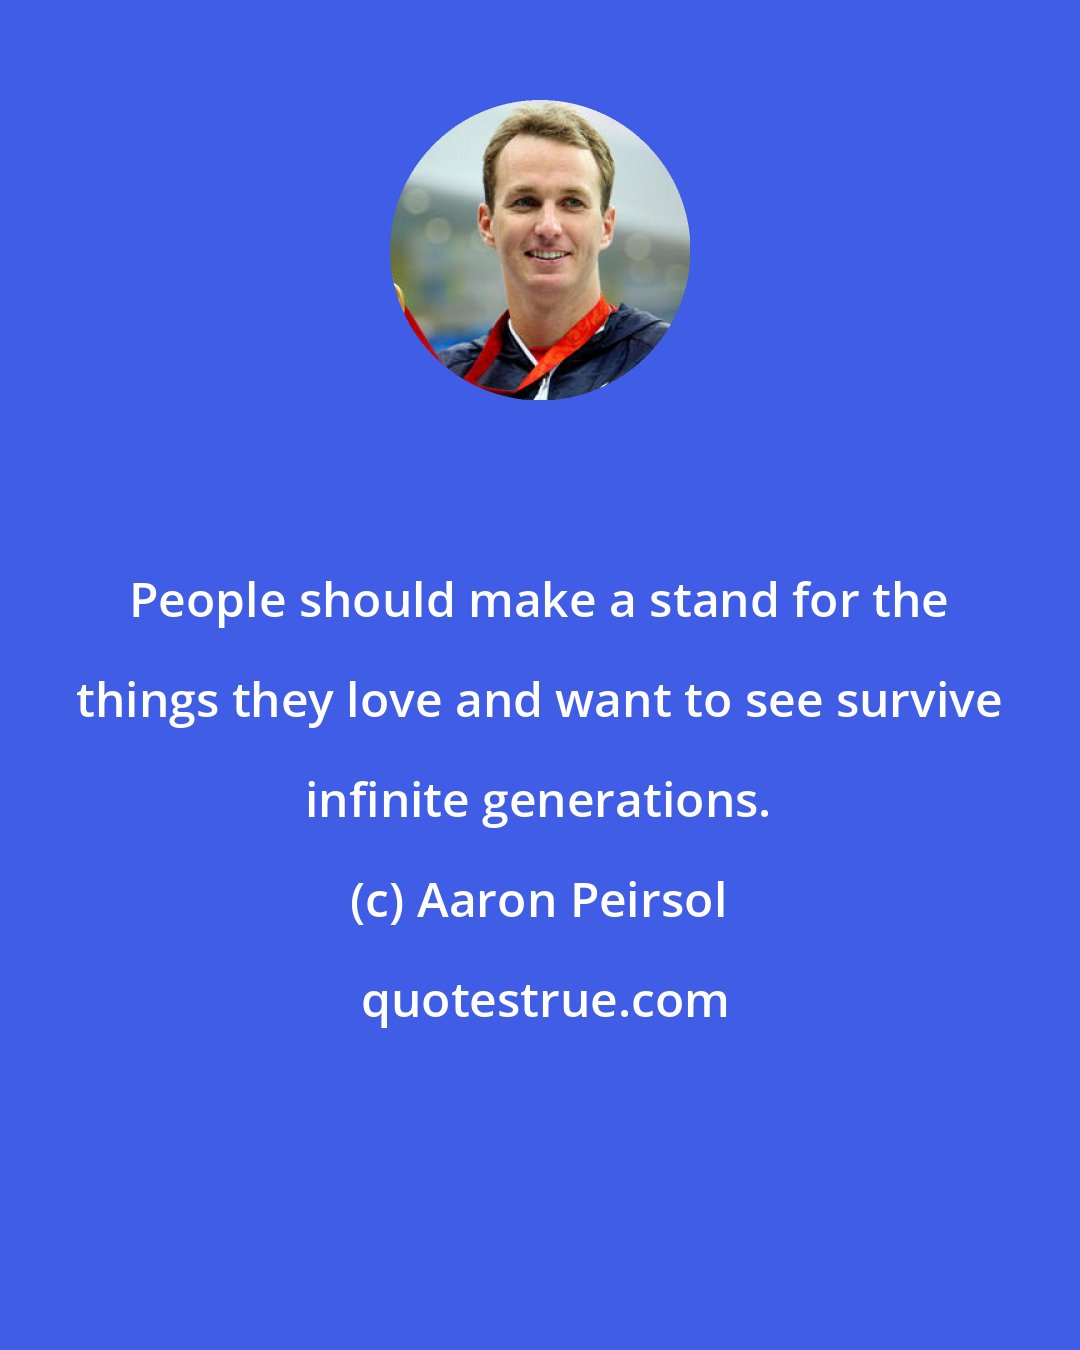 Aaron Peirsol: People should make a stand for the things they love and want to see survive infinite generations.